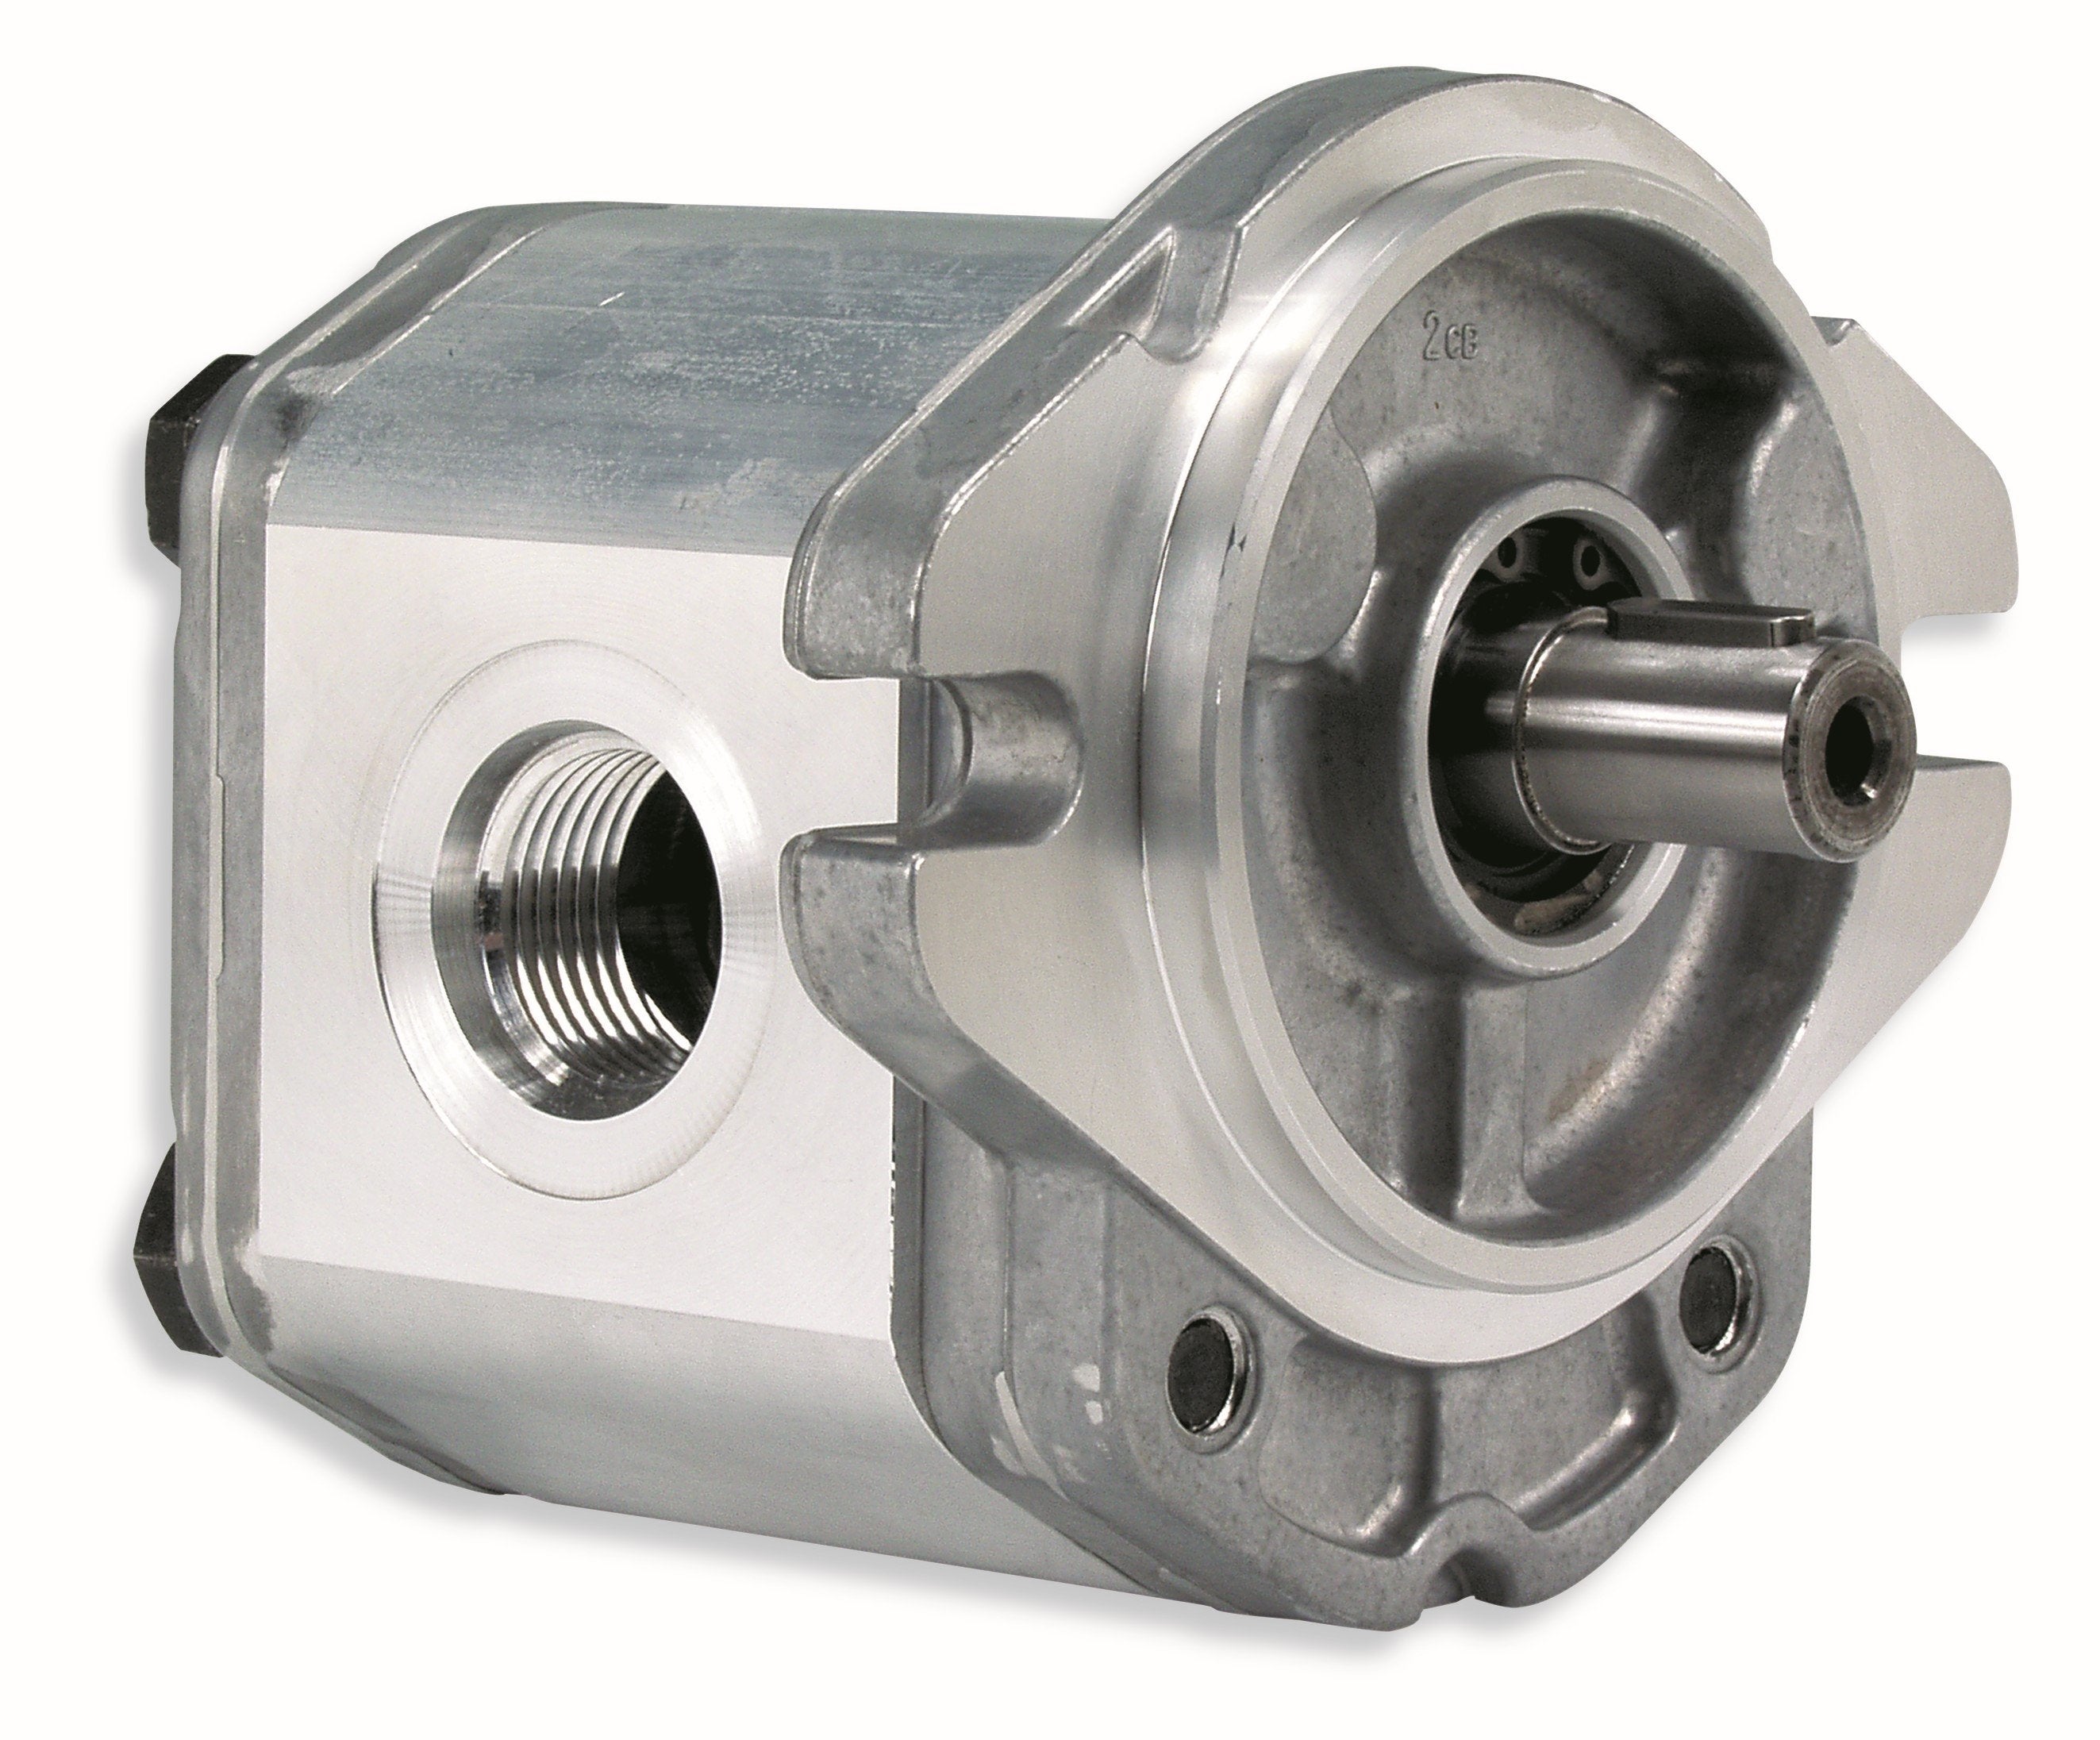 GHM1A-R-6-E2 : Marzocchi Gear Motor, Bidirectional, 4.1cc, 3915psi rated, 4000RPM, 0.5 (1/2") #8 SAE ports, 1/2" Bore x 1/8" Keyed Shaft